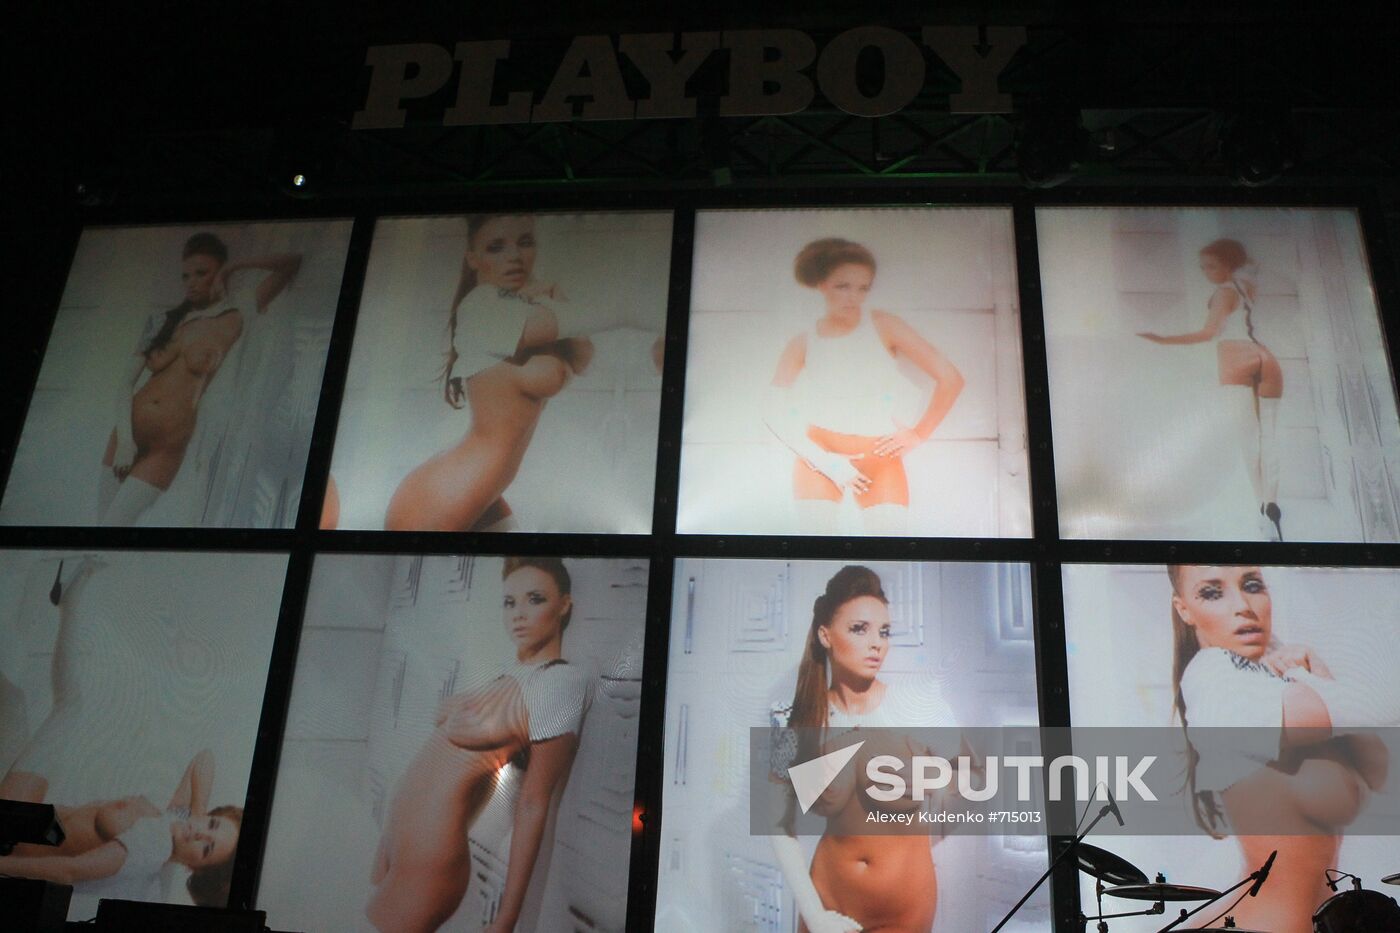 Playboy Playmate of the Year Awards